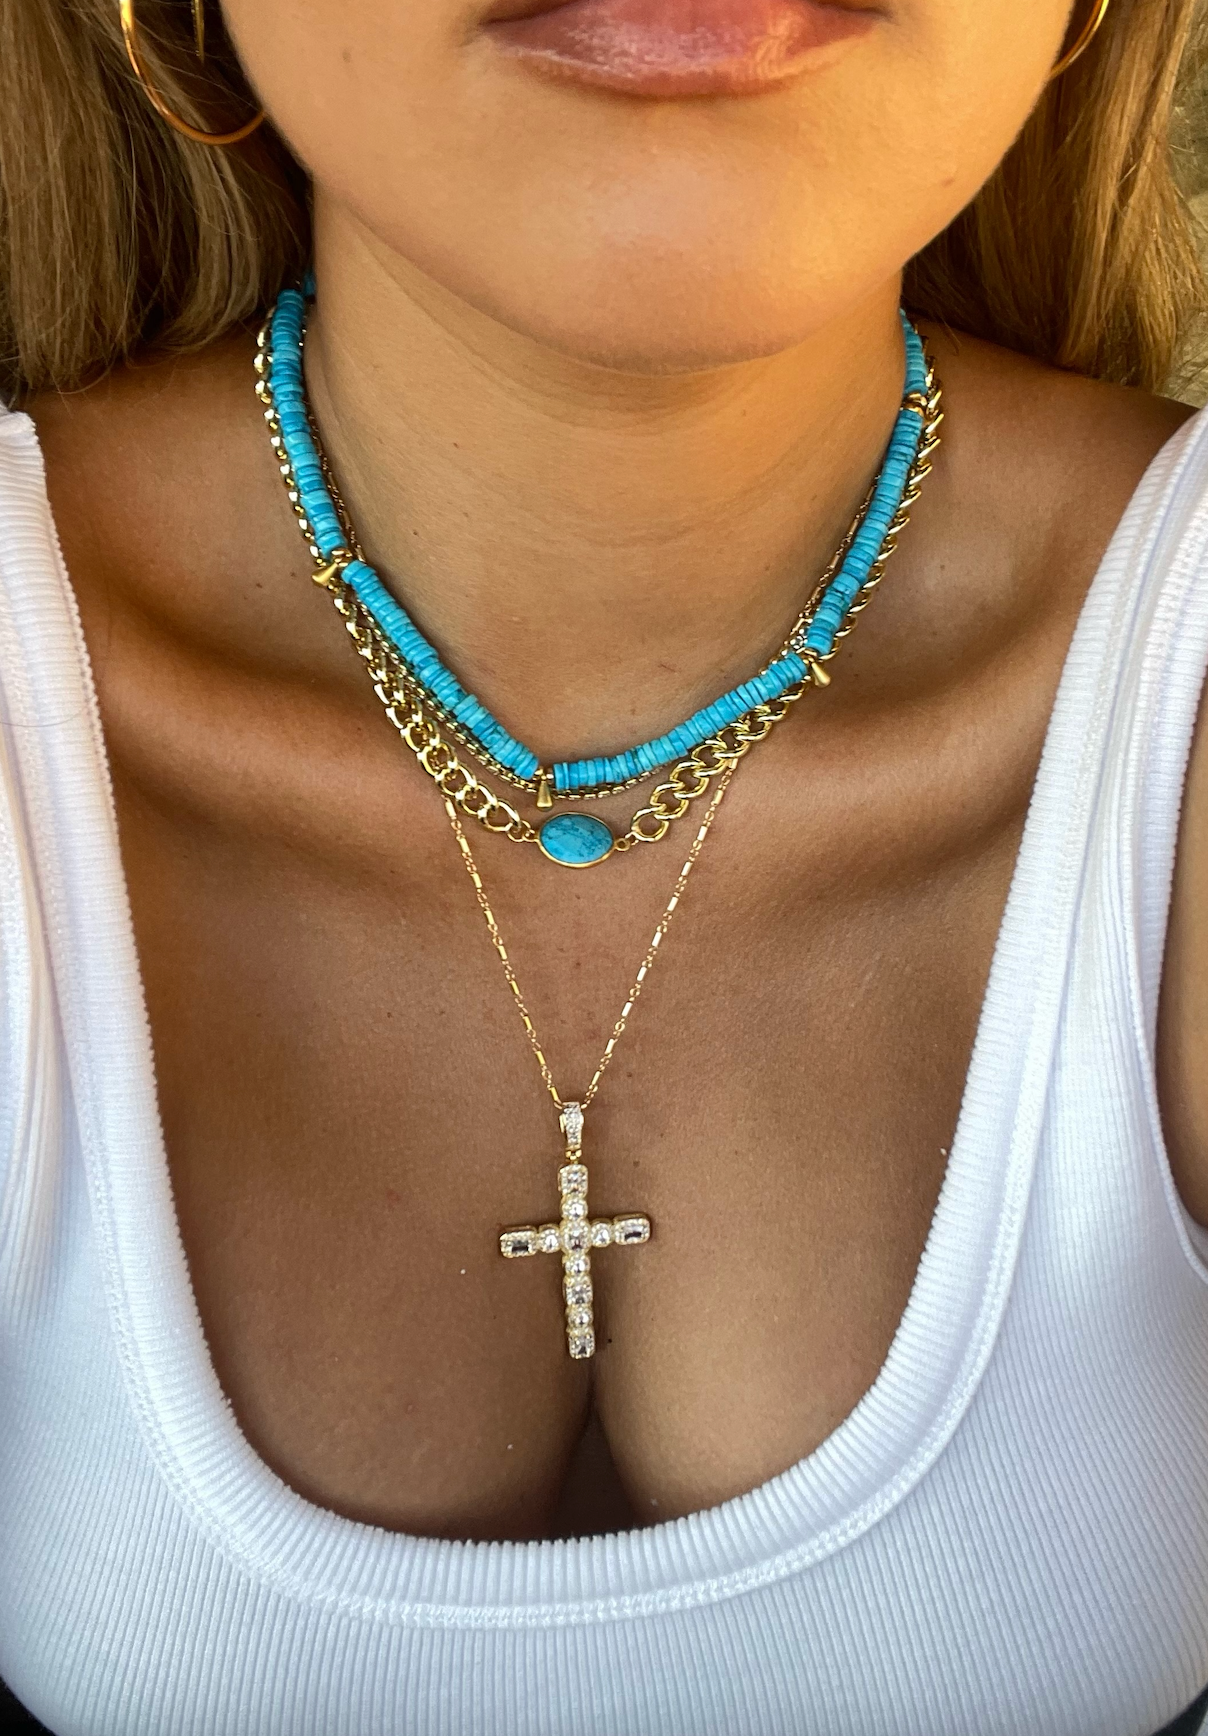 The Turquoise Cuban Necklace